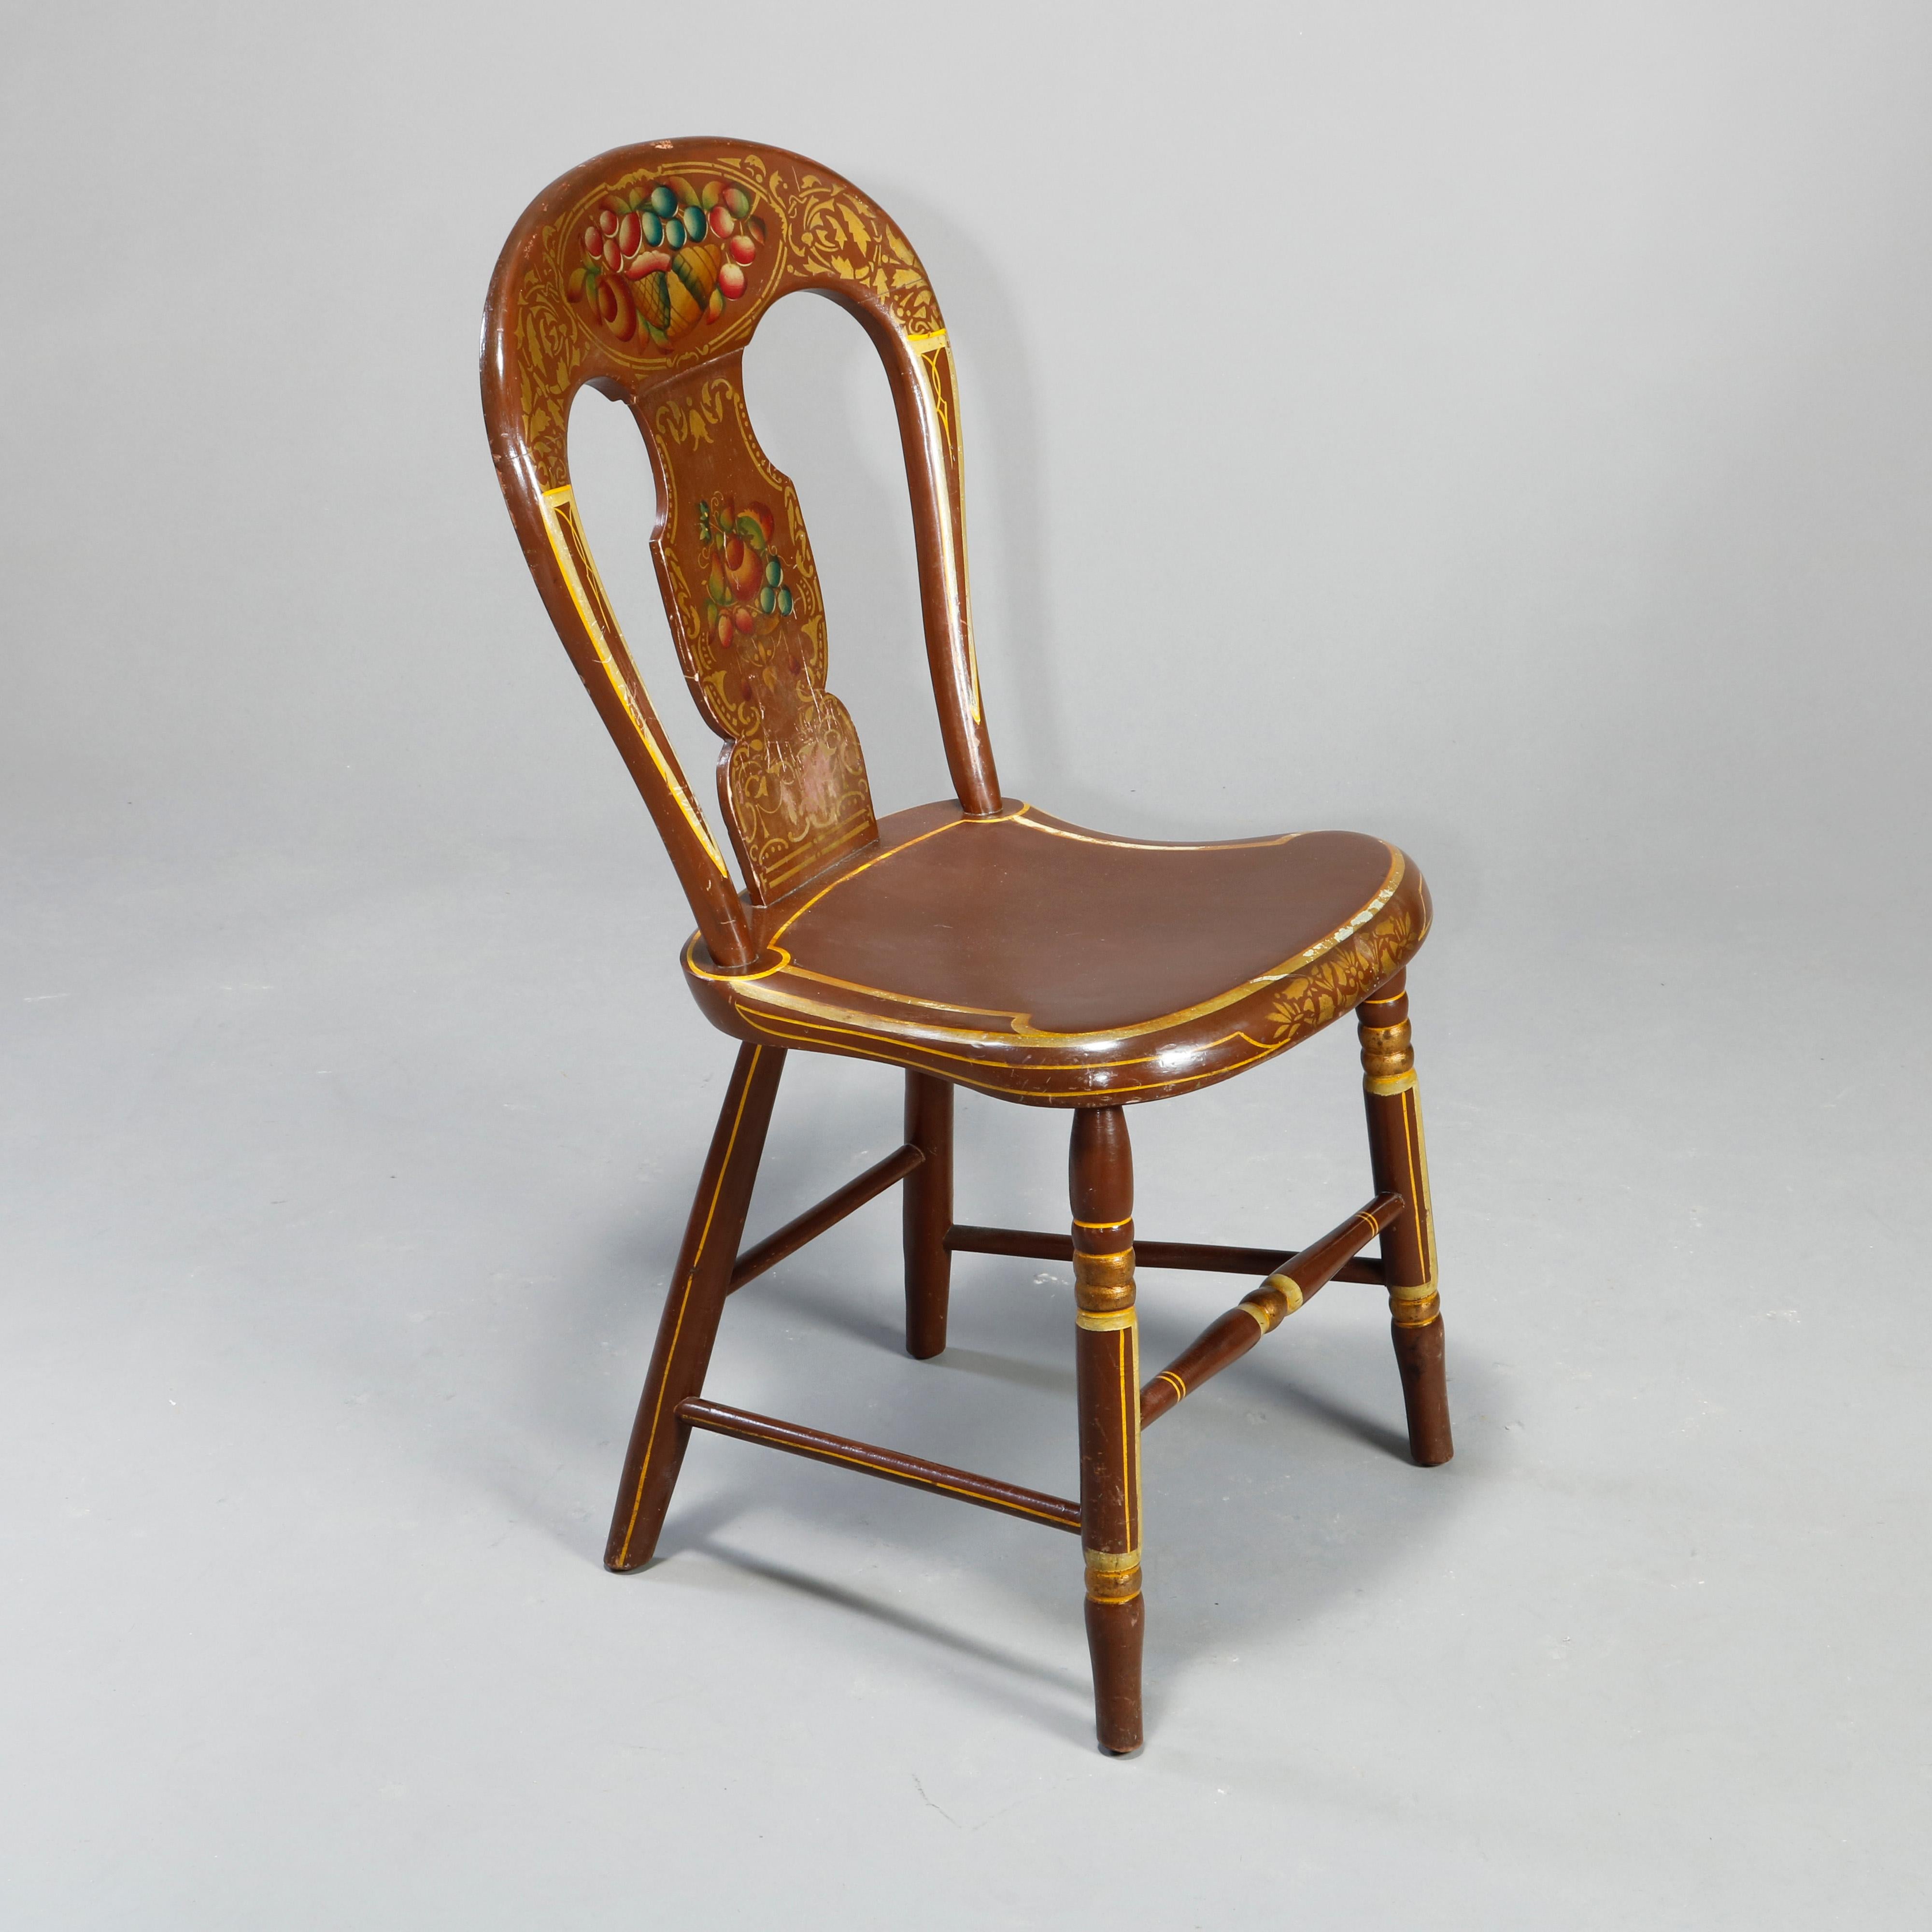 An antique set of six German Folk Art paint decorated chairs offer balloon backs with polychromed and gilt fruit and foliate stencil decoration, plank seats and raised on turned legs, gilt highlights throughout, 19th century

Measures: 33.75